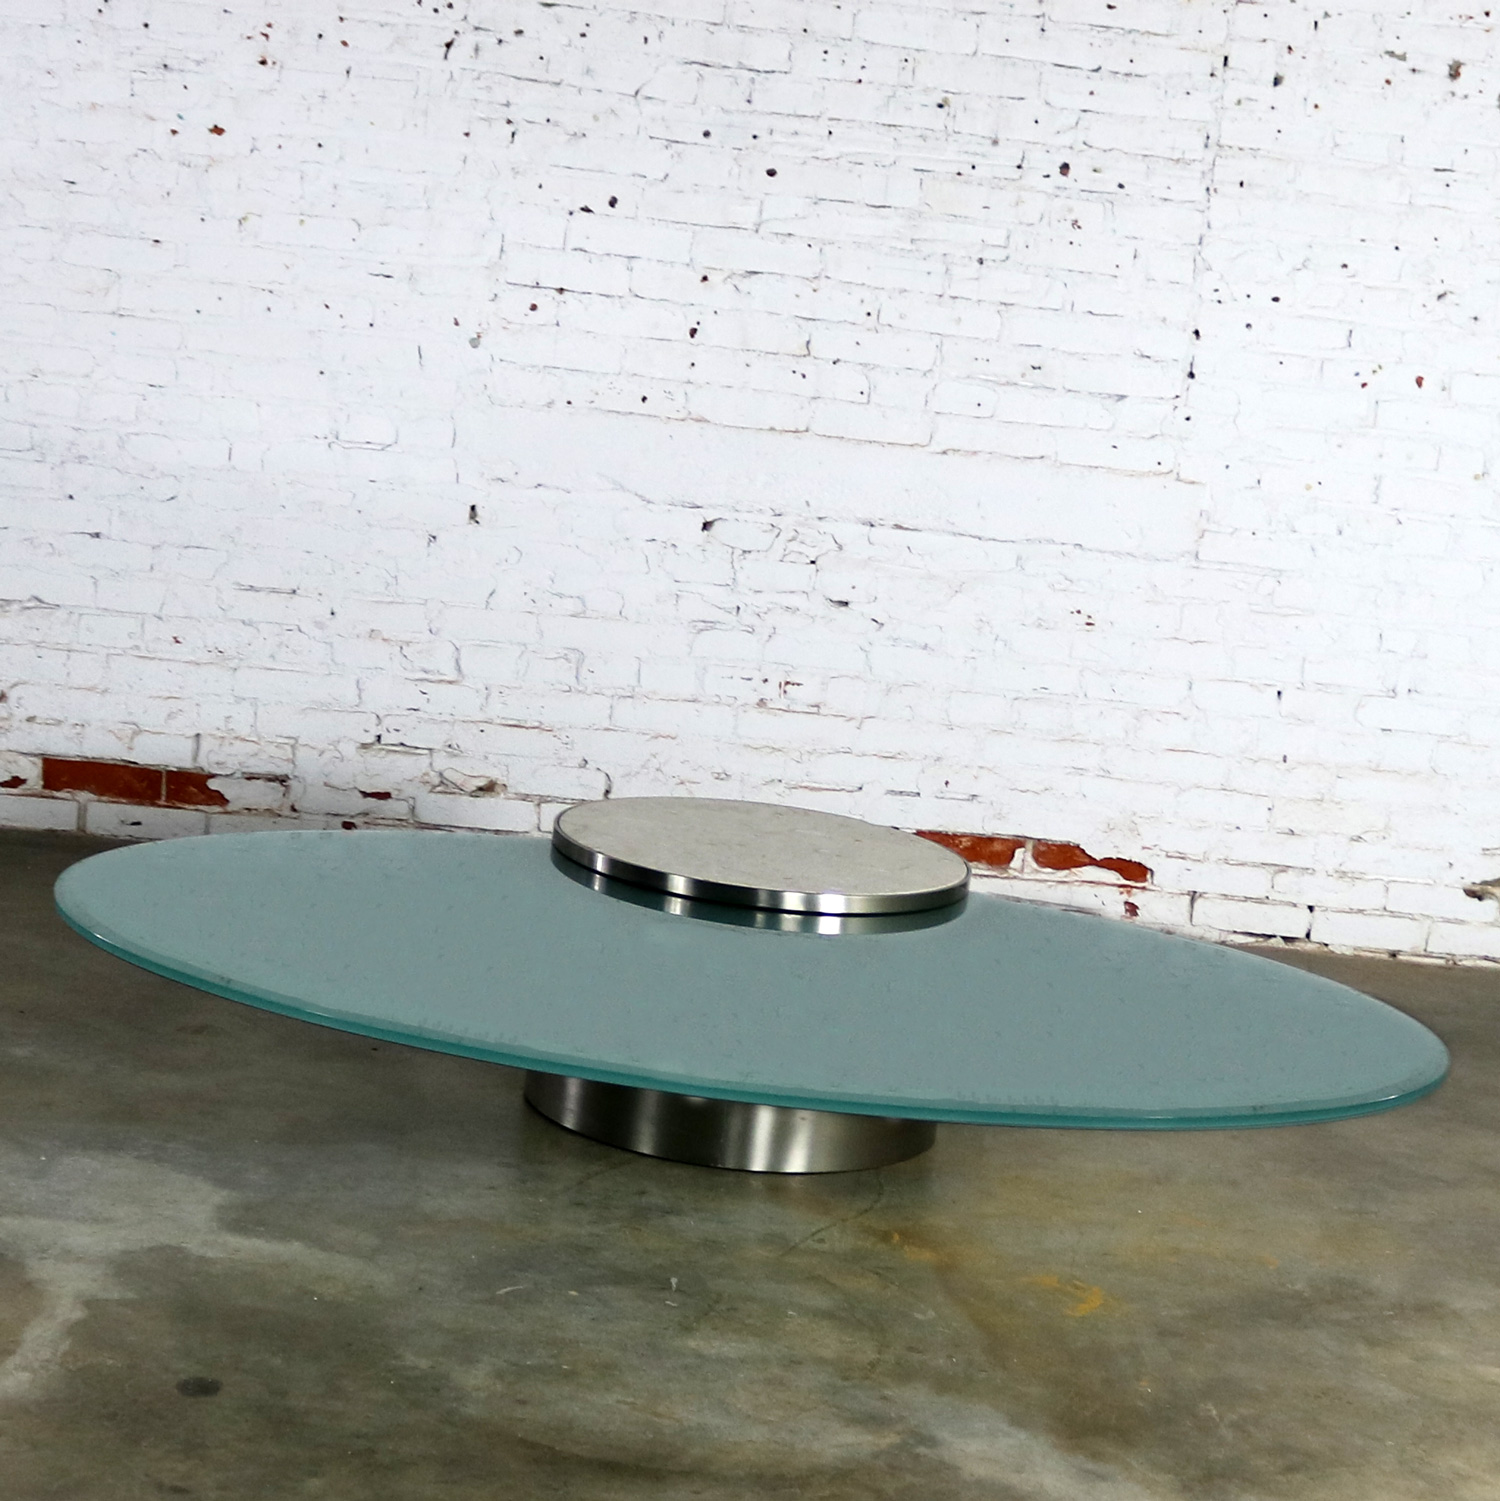 Late 20th-Early 21st Century Modern Hoop Cantilevered Low Cocktail or Coffee Table by J. Wade Beam for Brueton